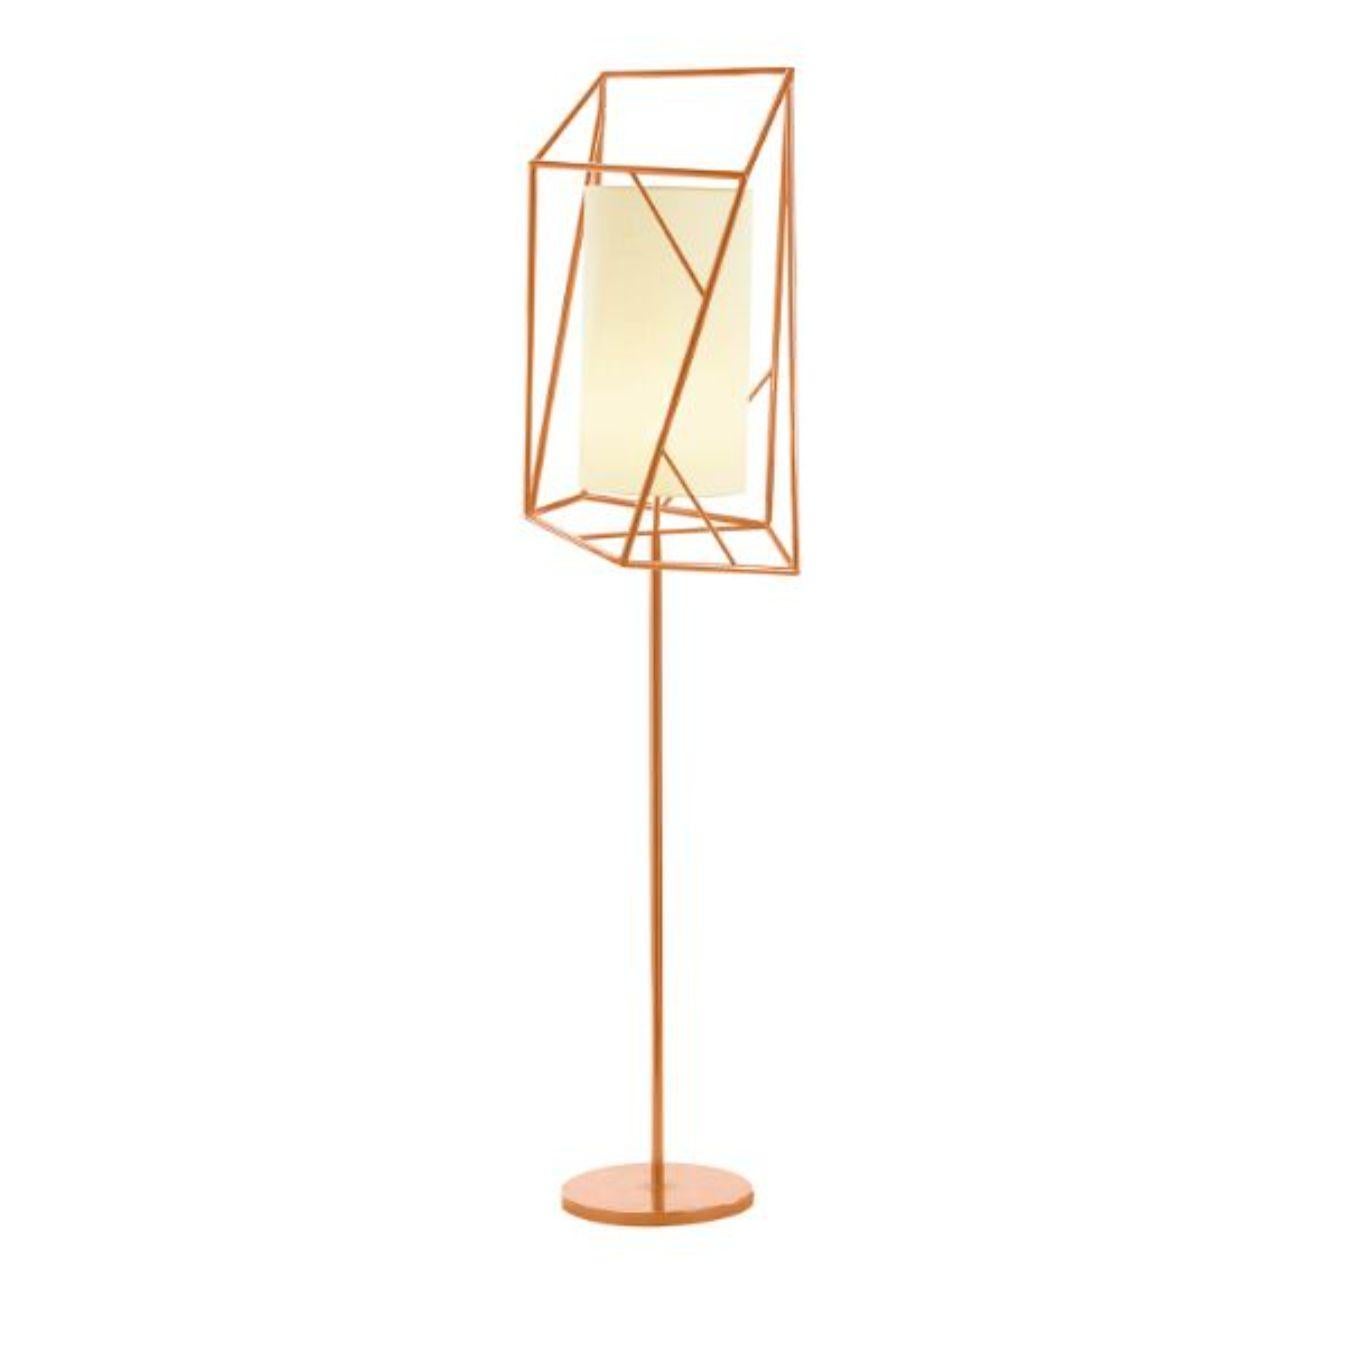 Salmon Star floor lamp by Dooq
Dimensions: W 45 x D 45 x H 170 cm
Materials: lacquered metal, polished or satin metal.
abat-jour: linen
Also available in different colors and materials.

Information:
230V/50Hz
E27/1x20W LED
120V/60Hz
E26/1x15W